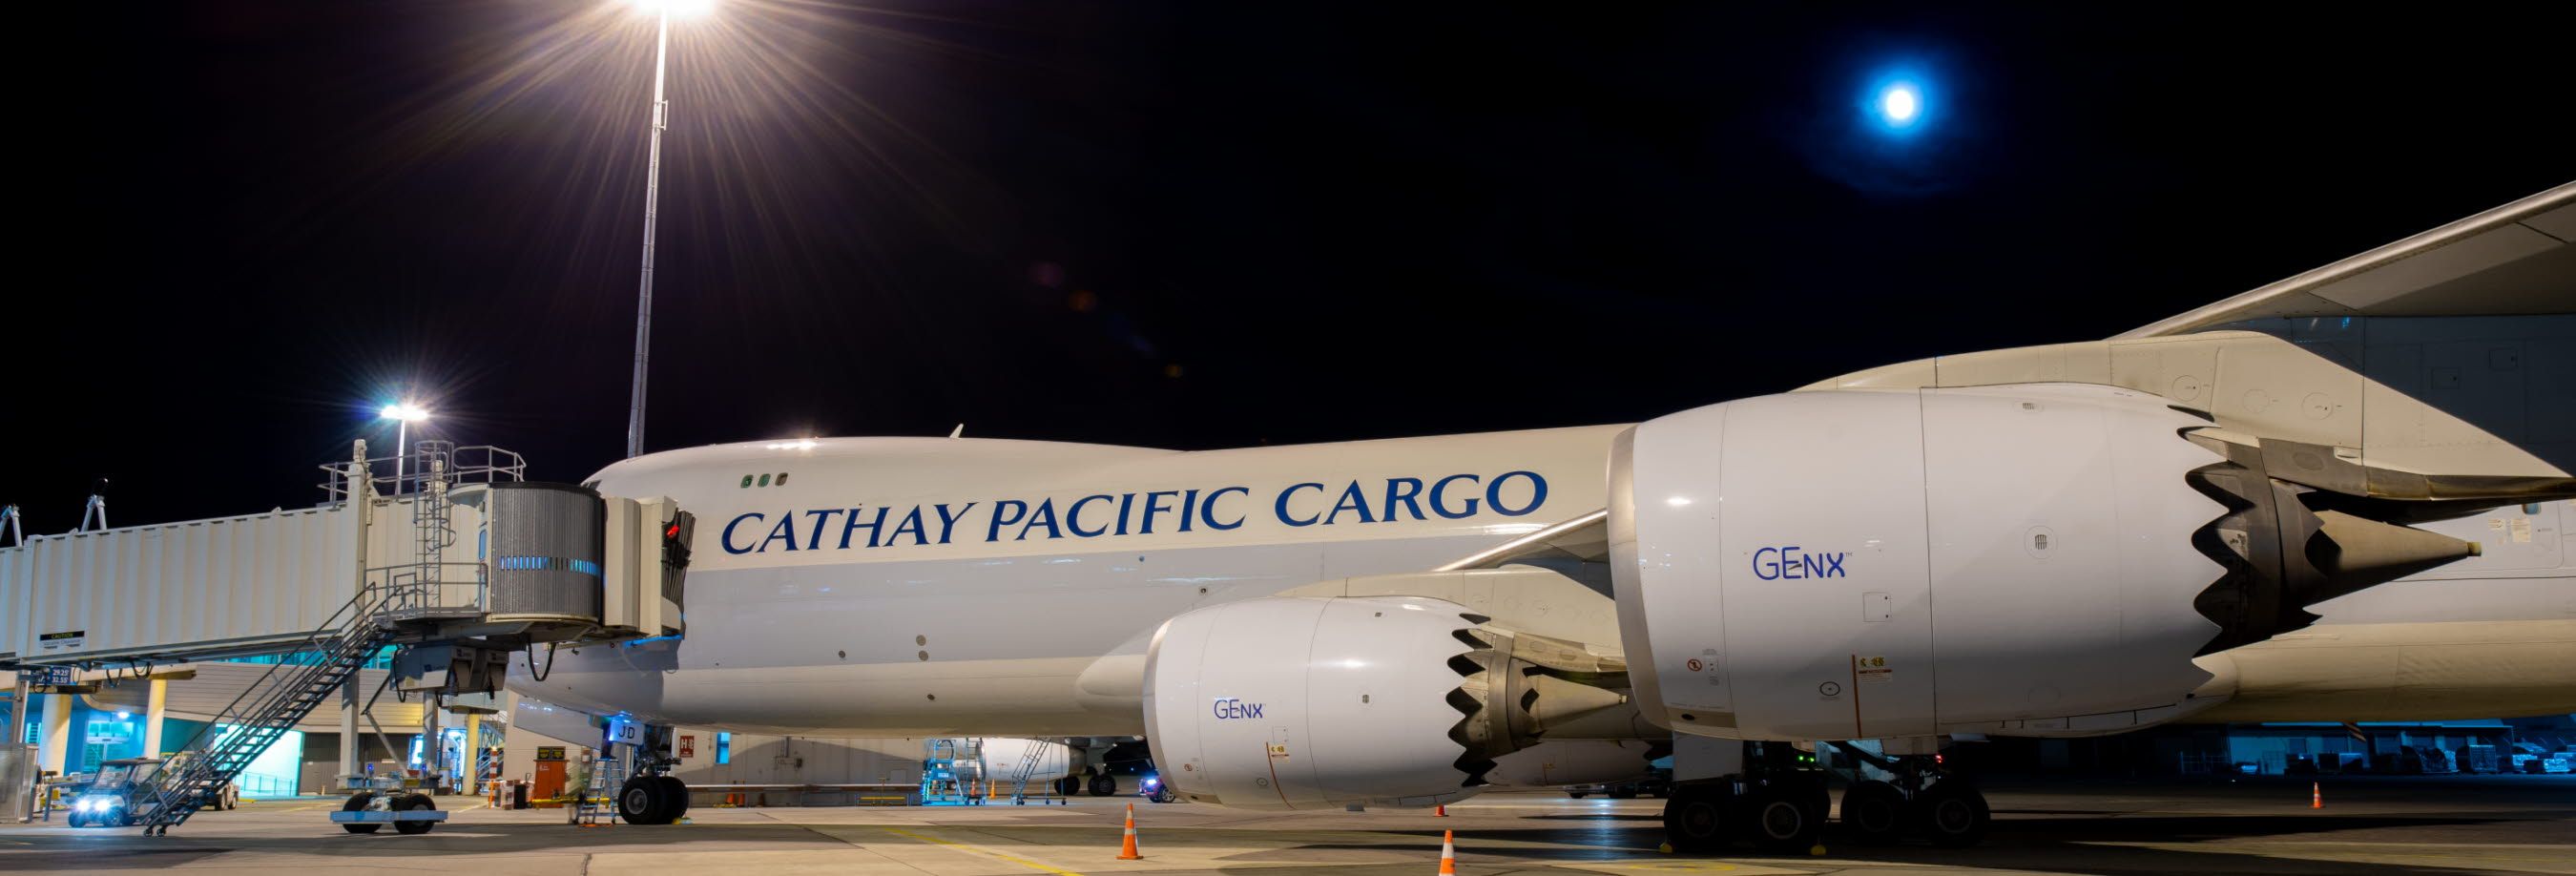 Cathay-Pacific-Boeing-747-Freighter-Christchurch-Airport